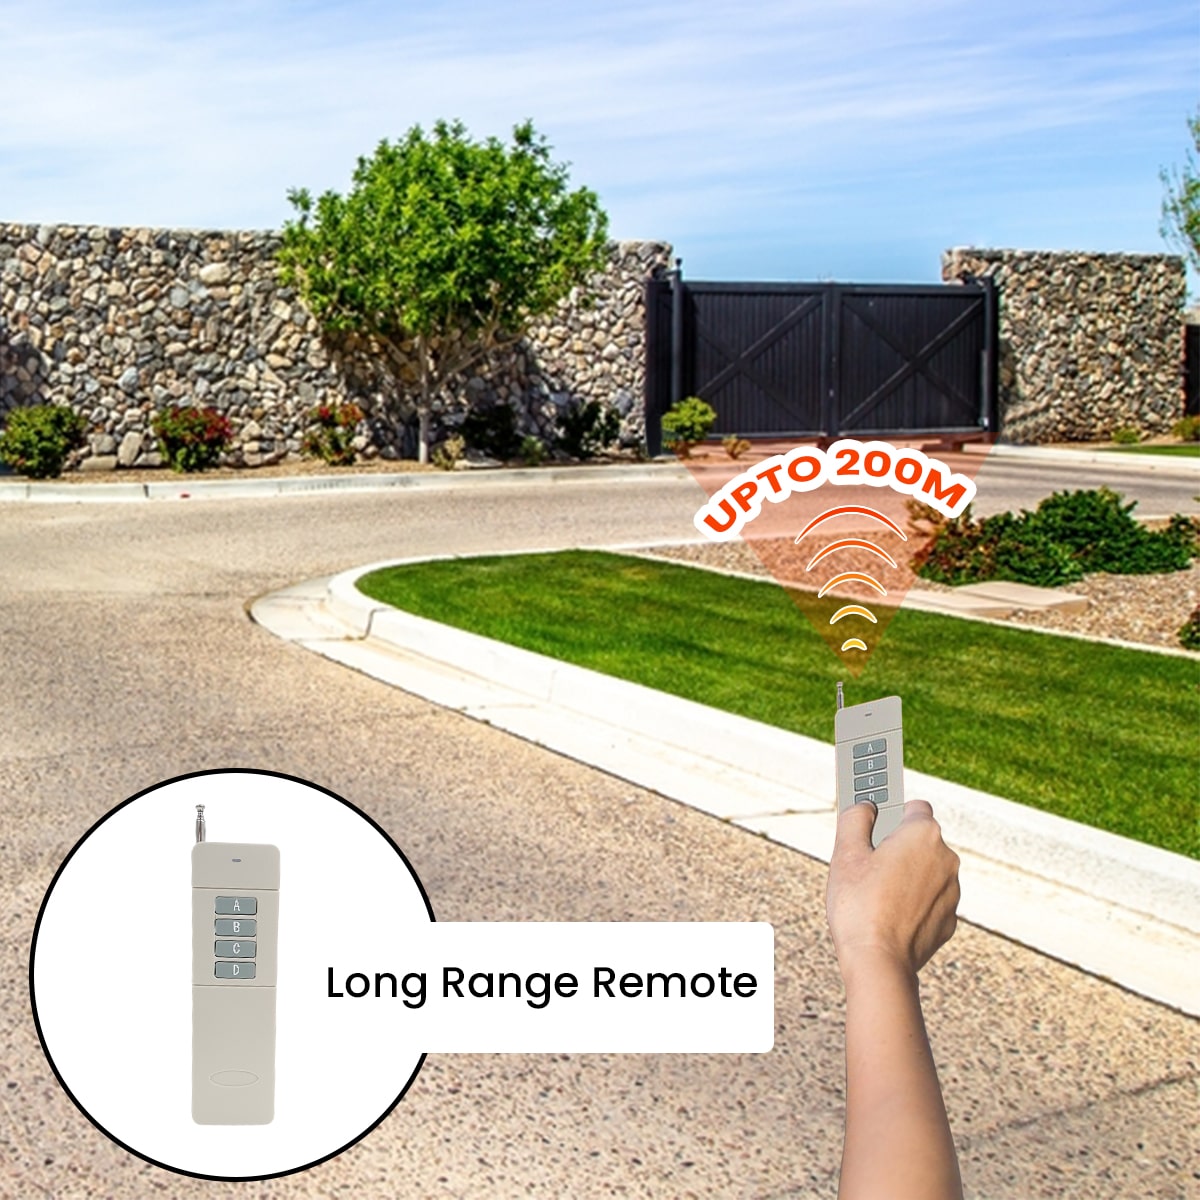 Long Range Remote Control suitable for our gate opener